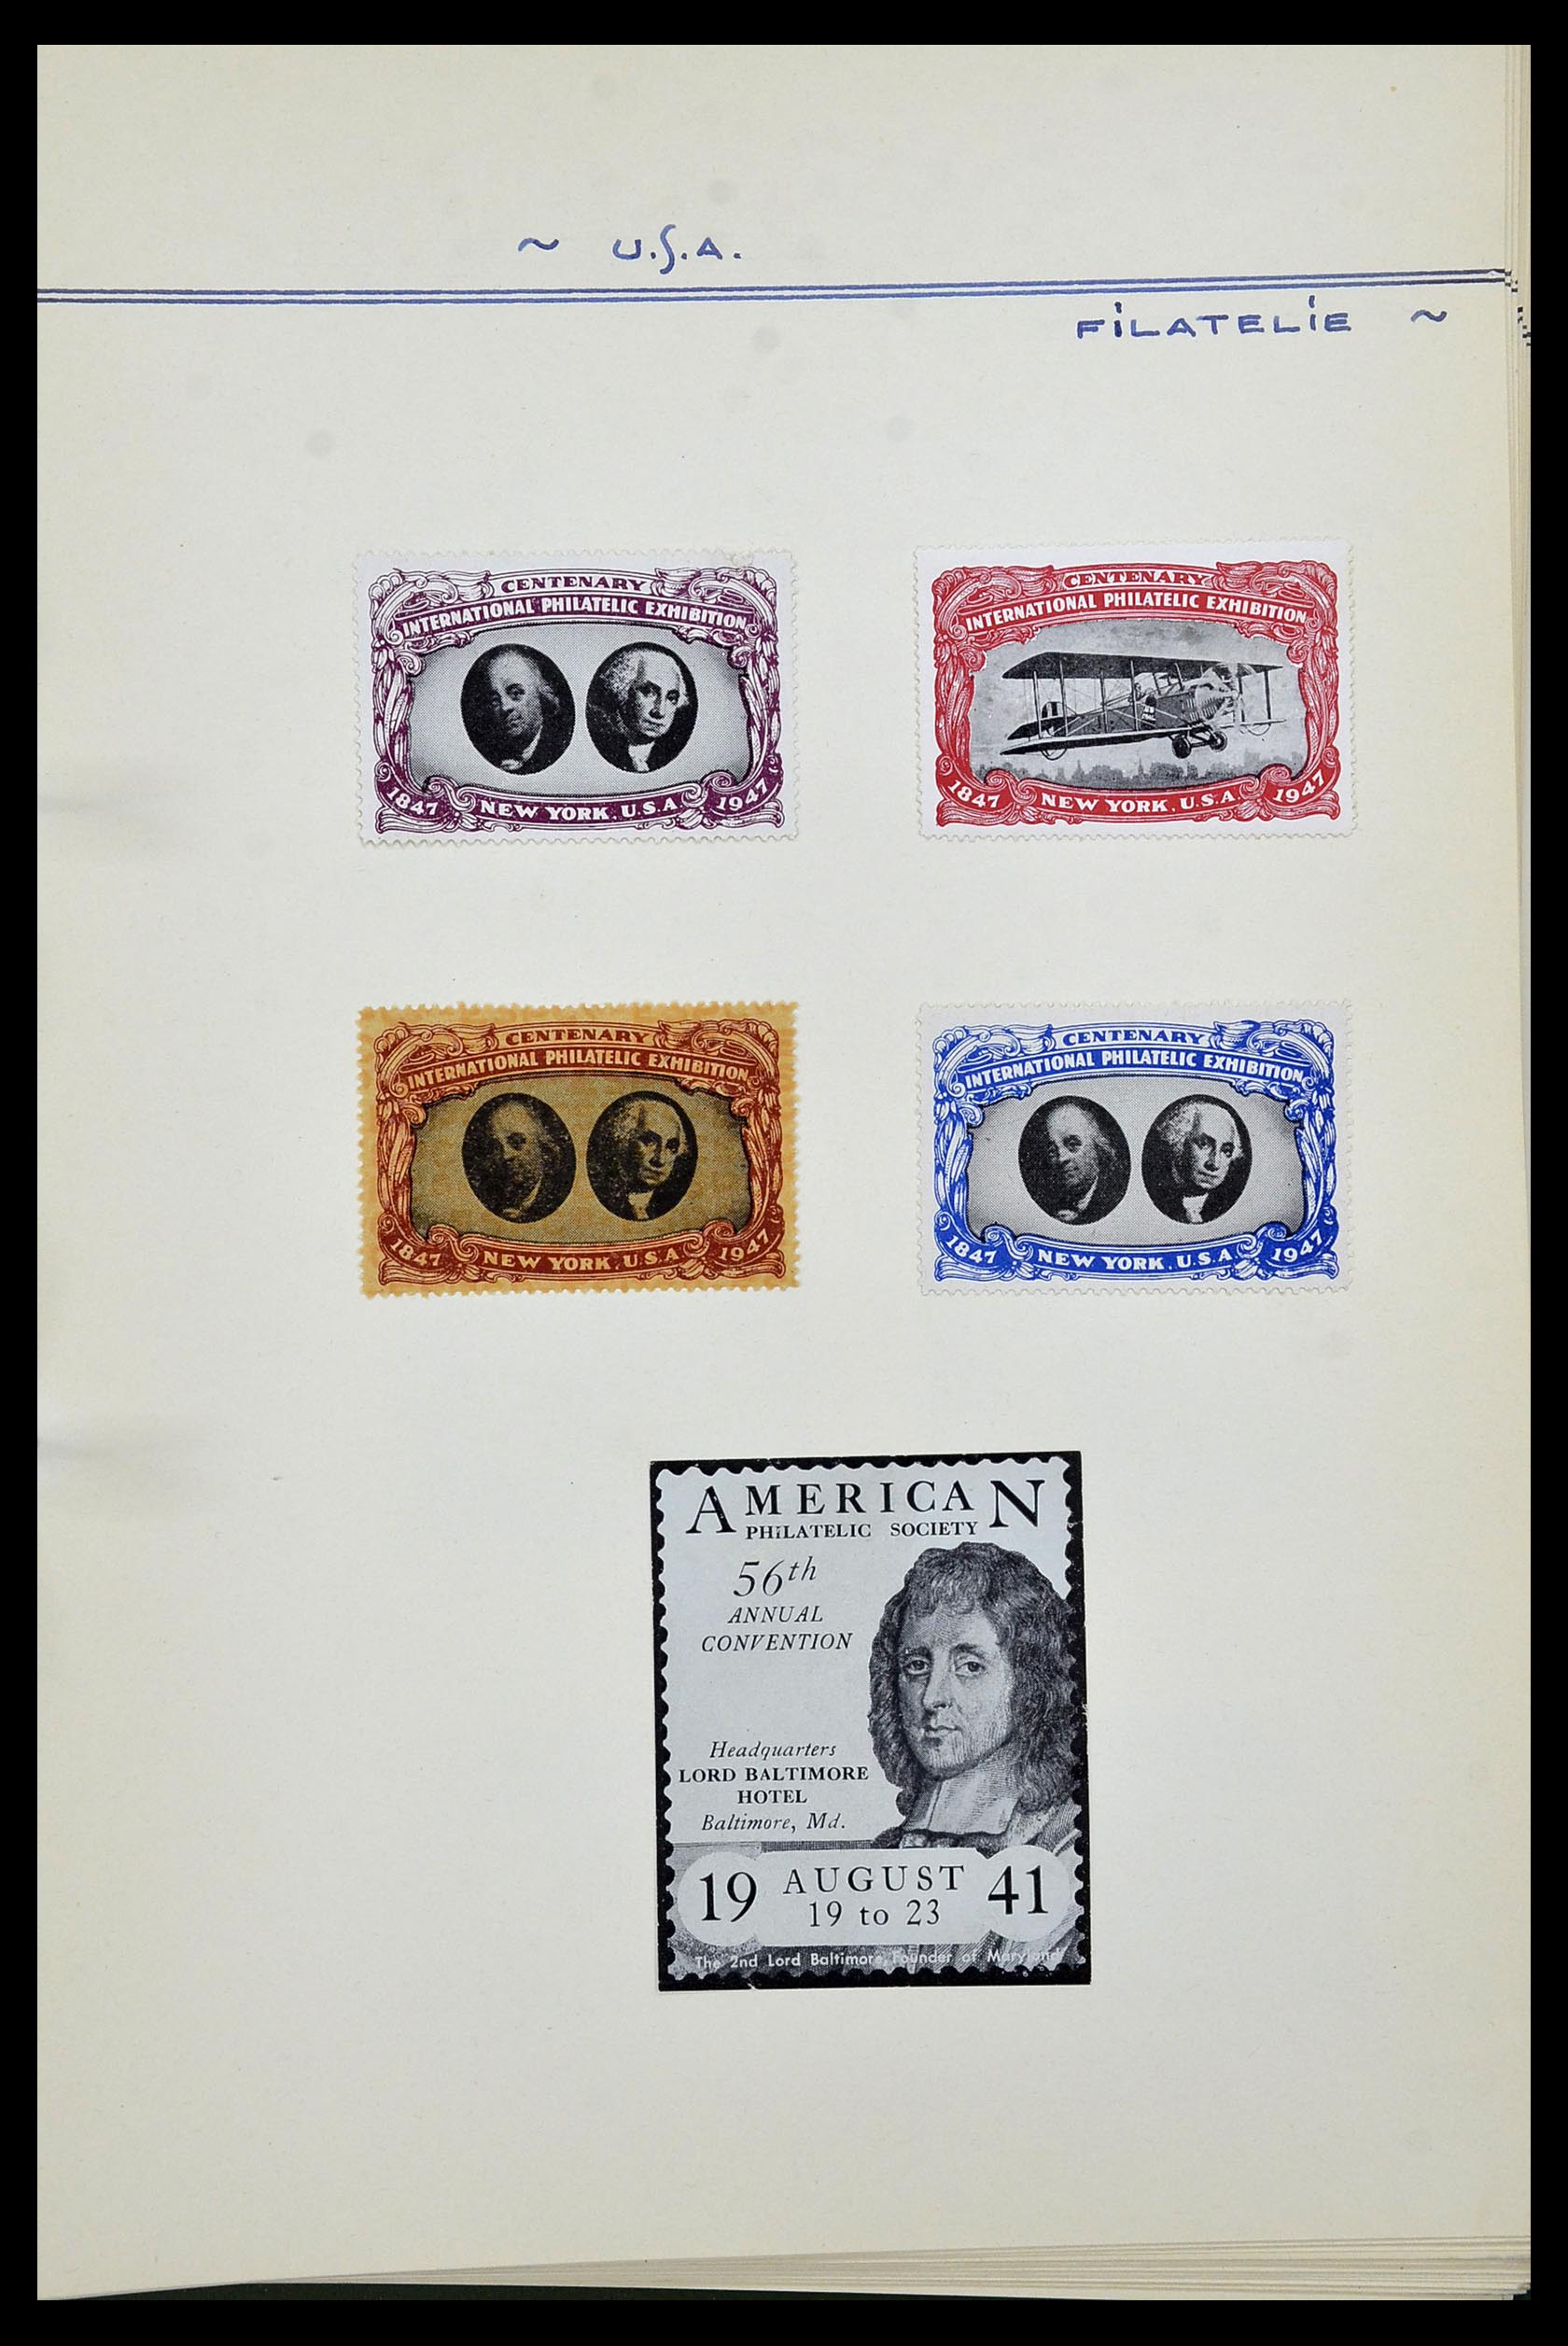 34486 056 - Stamp Collection 34486 USA philatelic labels 1926-1960.